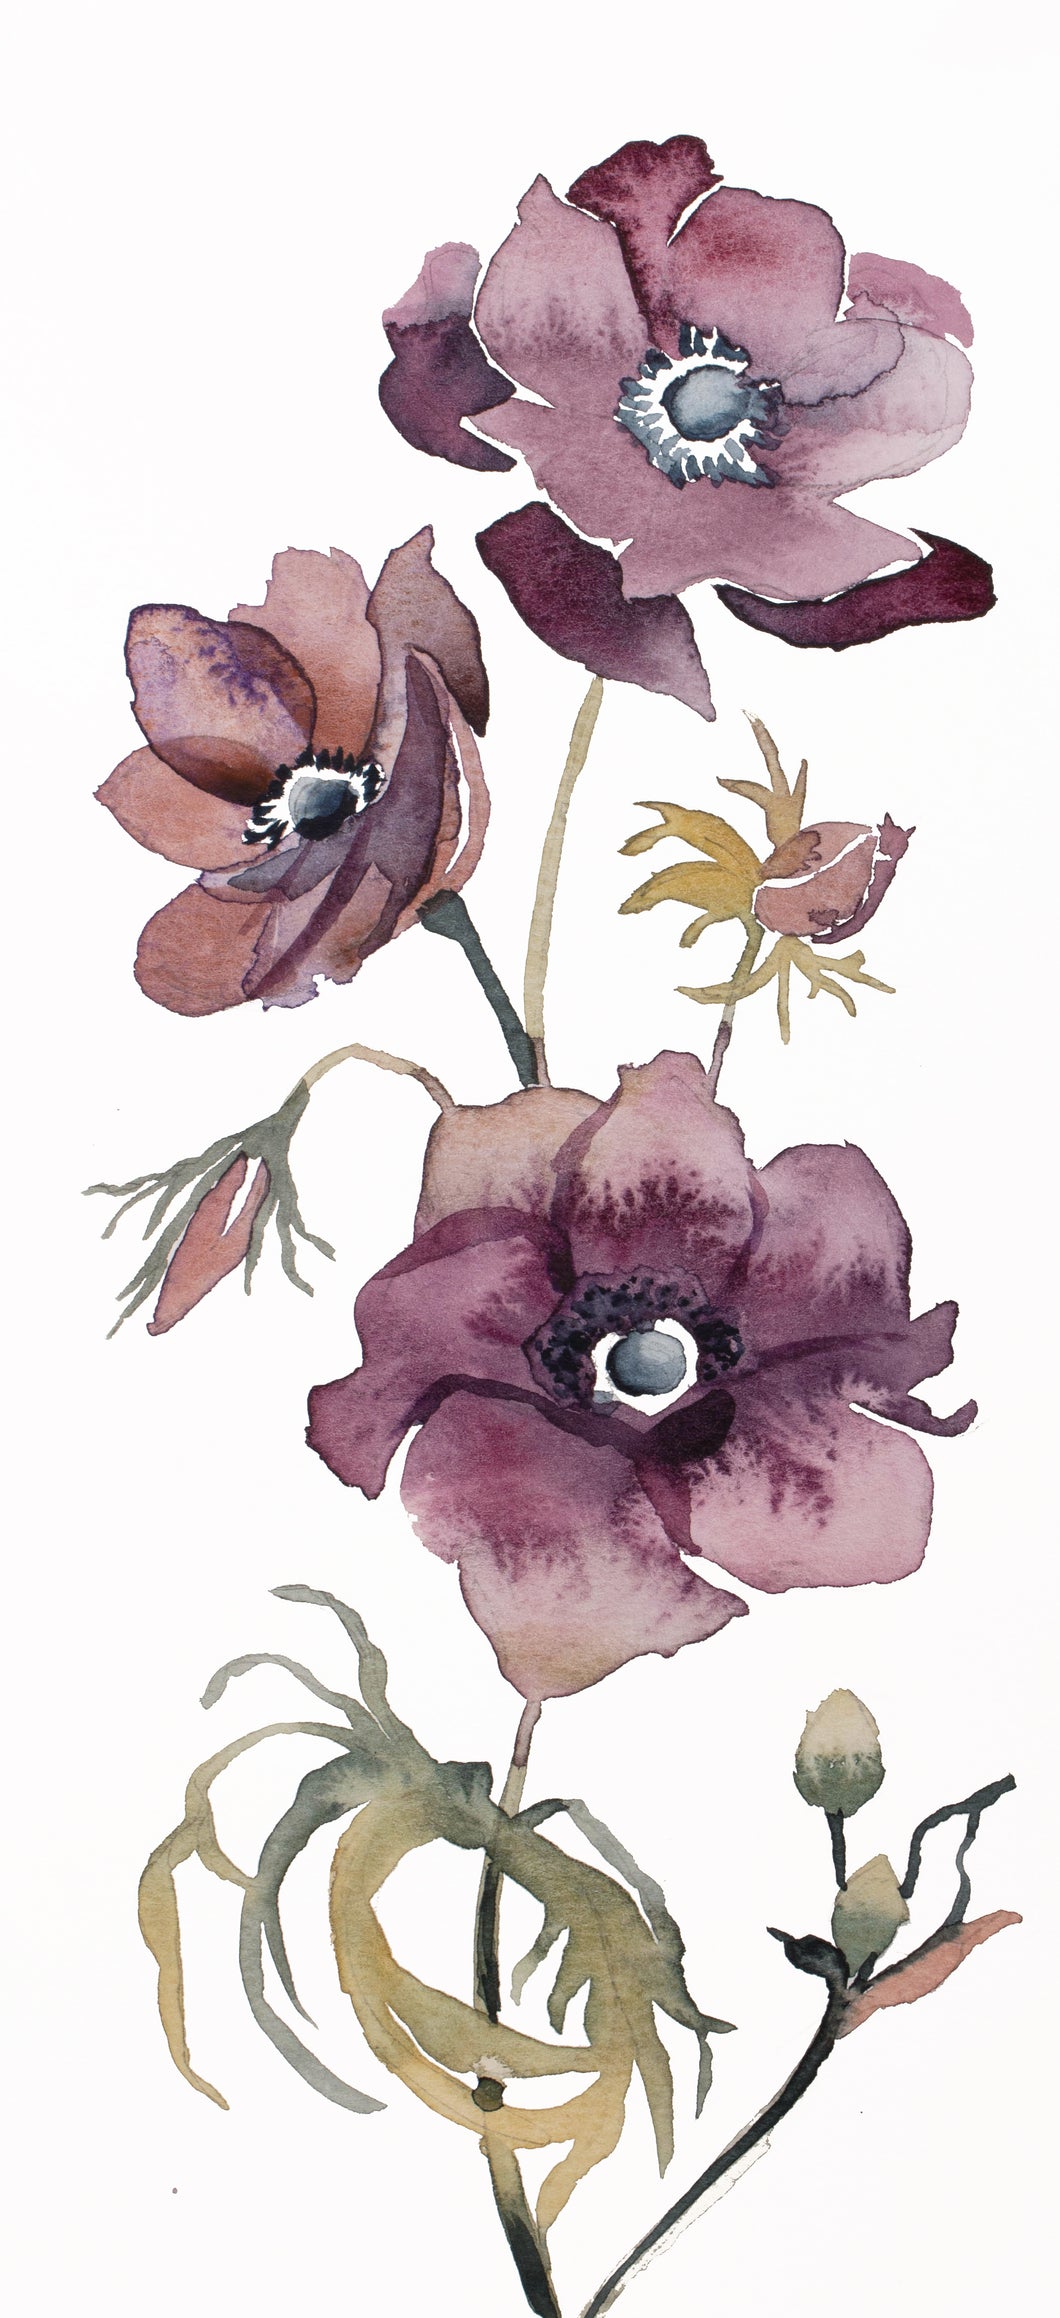 4.75” x 10.75” original watercolor botanical hellebores floral painting in an expressive, impressionist, minimalist, modern style by contemporary fine artist Elizabeth Becker. 